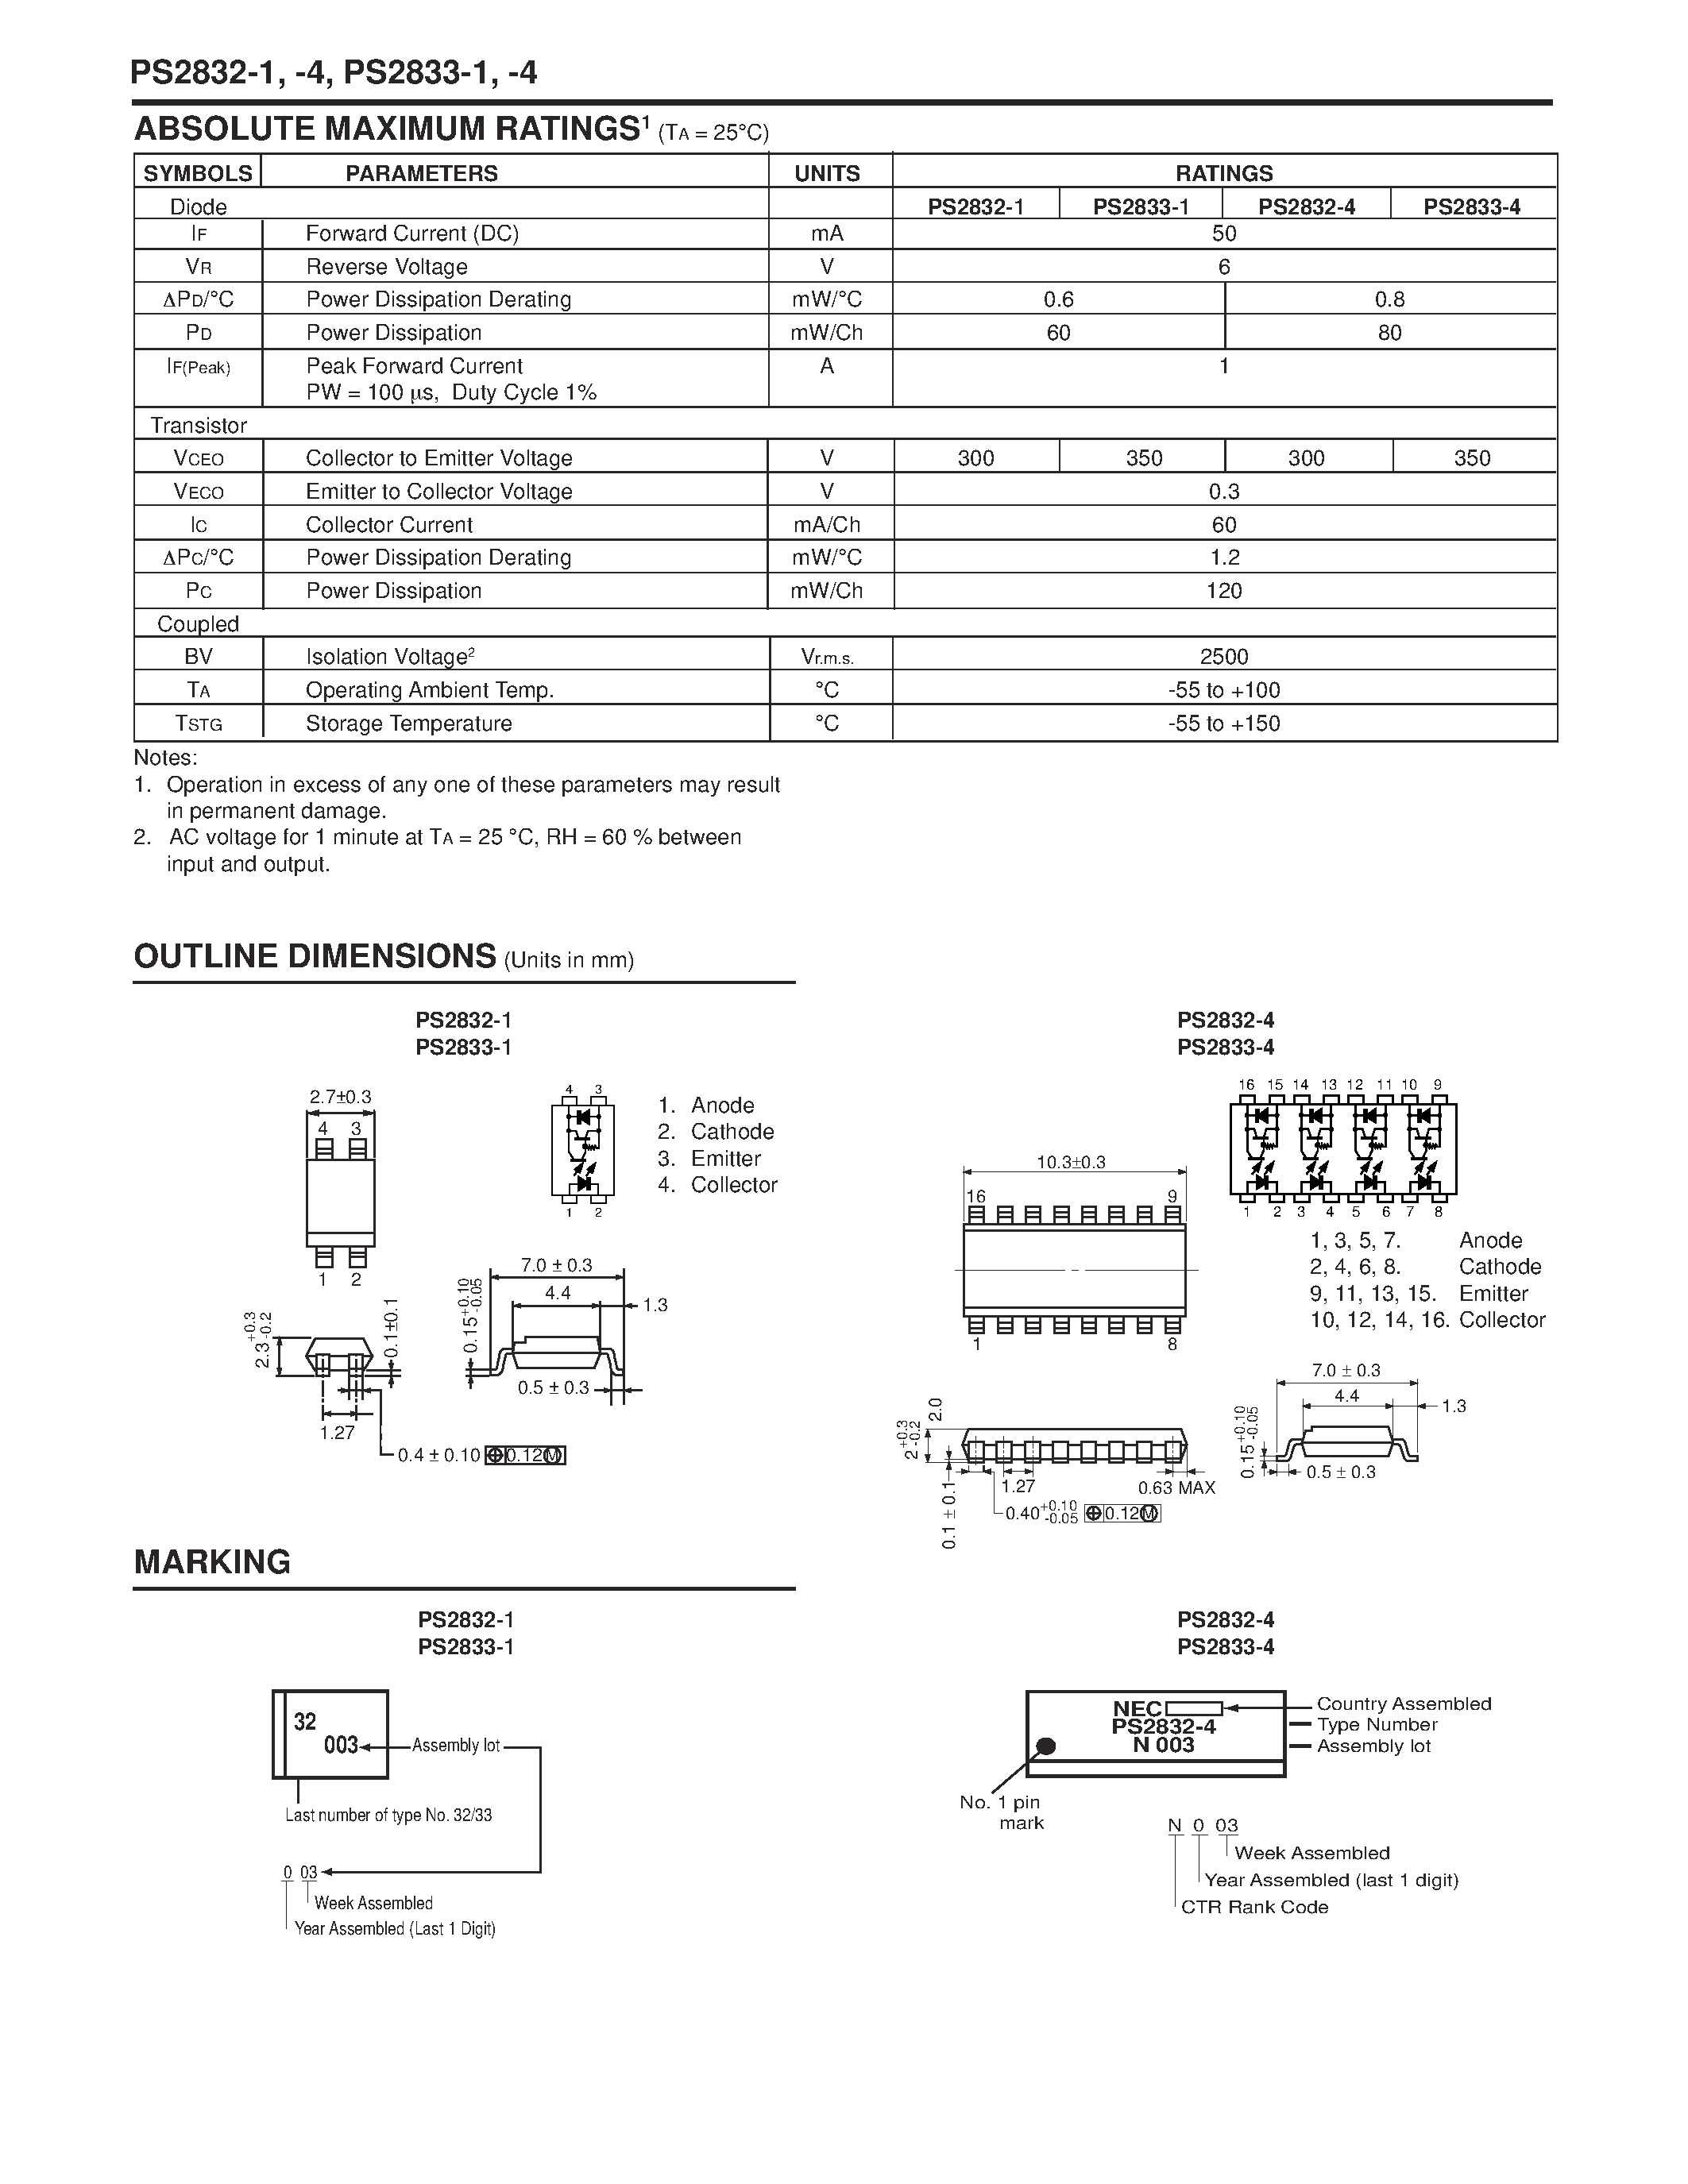 Datasheet PS2832-1-V-F4 - HIGH ISOLATION VOLTAGE HIGH COLLECTOR TO EMITTER VOLTAGE SOP MULTI OPTOCOUPLER page 2